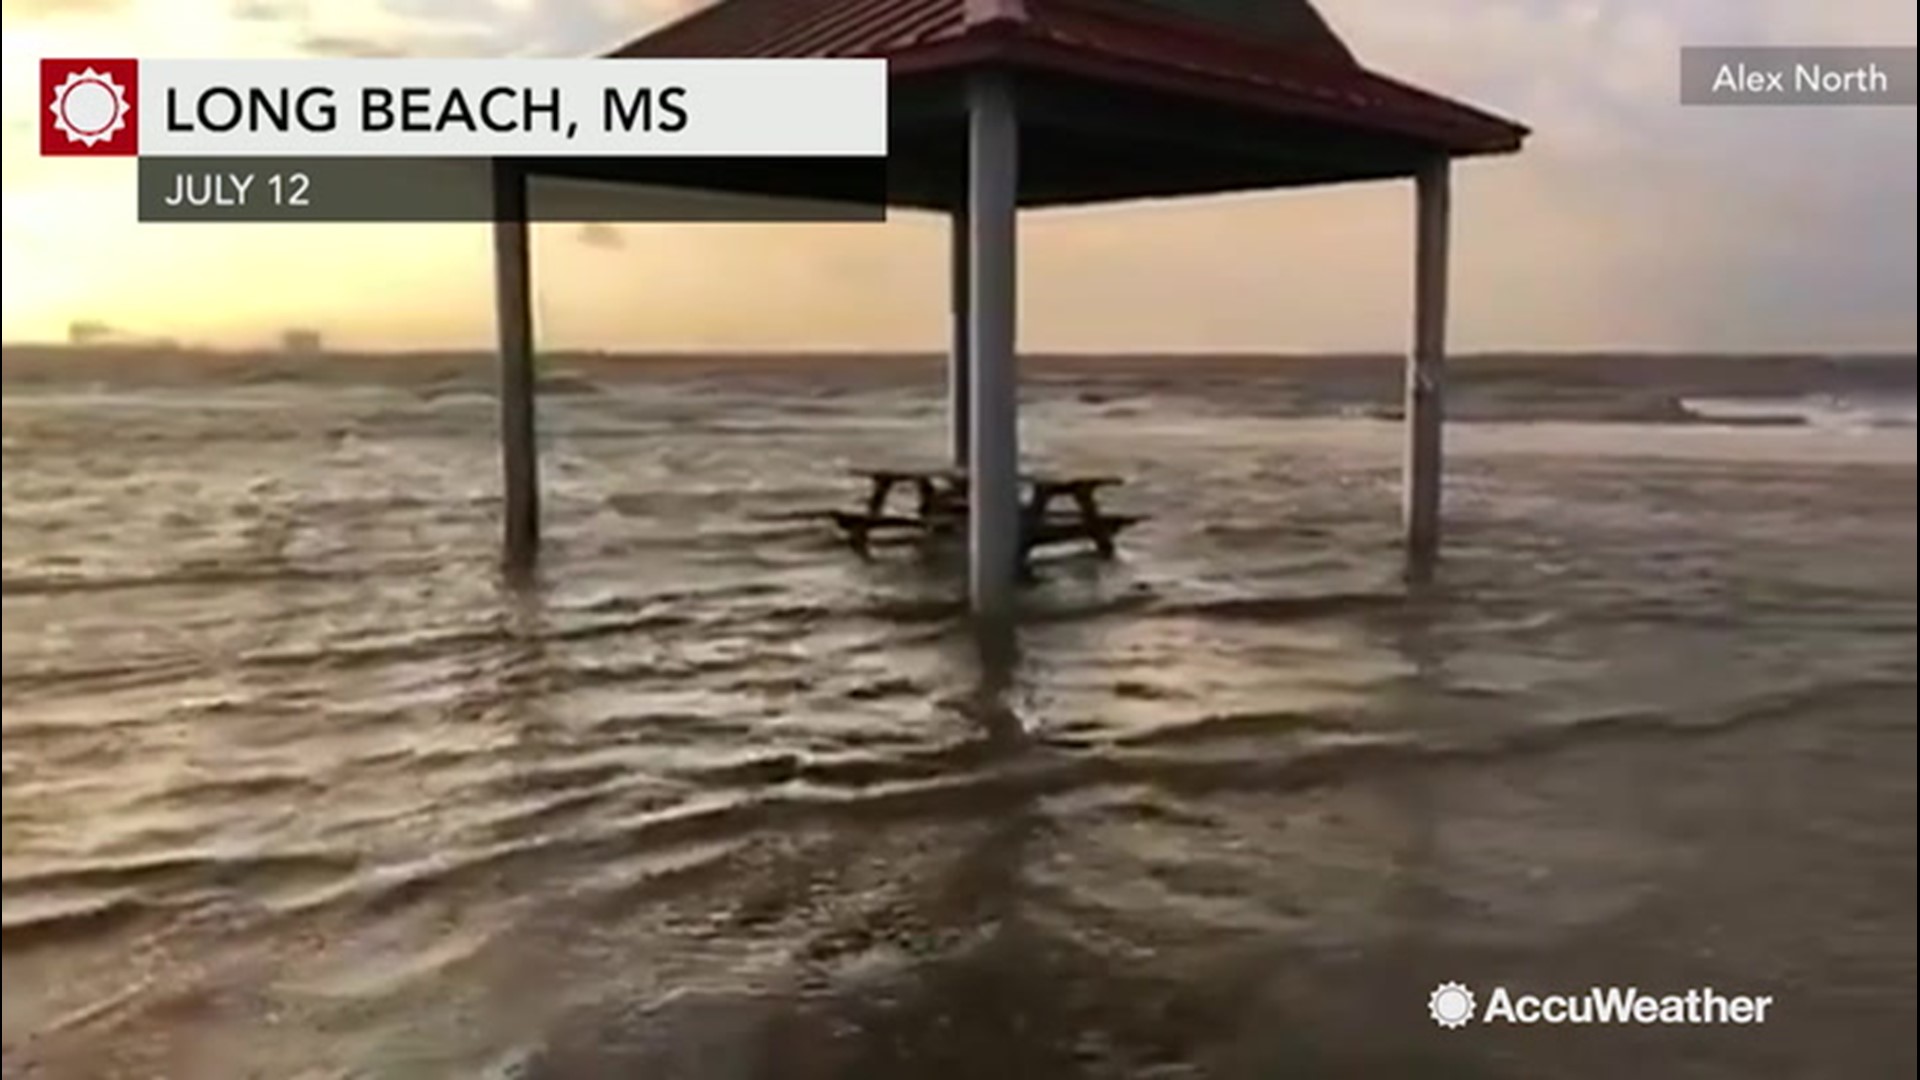 Mississippi's Gulf Coast has taken hit environmentally due to the effects of Hurricane Barry according to governor Phil Bryant.  He explains three particular marine animals affected by the storm are oysters, shrimp and bottlenose dolphins.